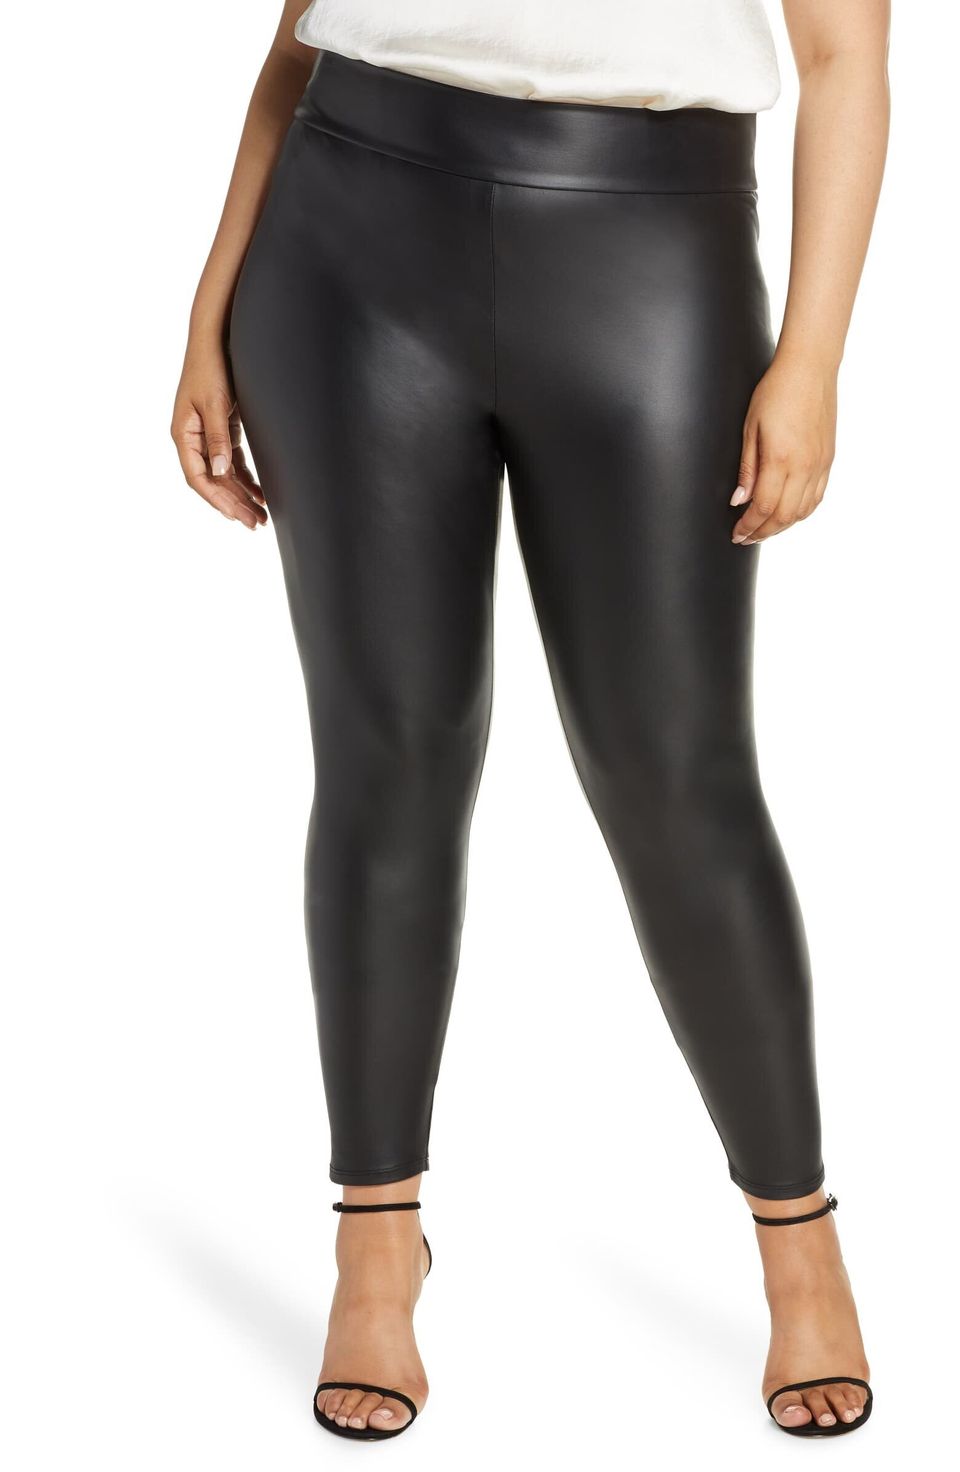 ✨@spanx plus size faux leather leggings are 20% off!✨ This is one of the  only times they go on sale, so I'm sharing a few of my fav